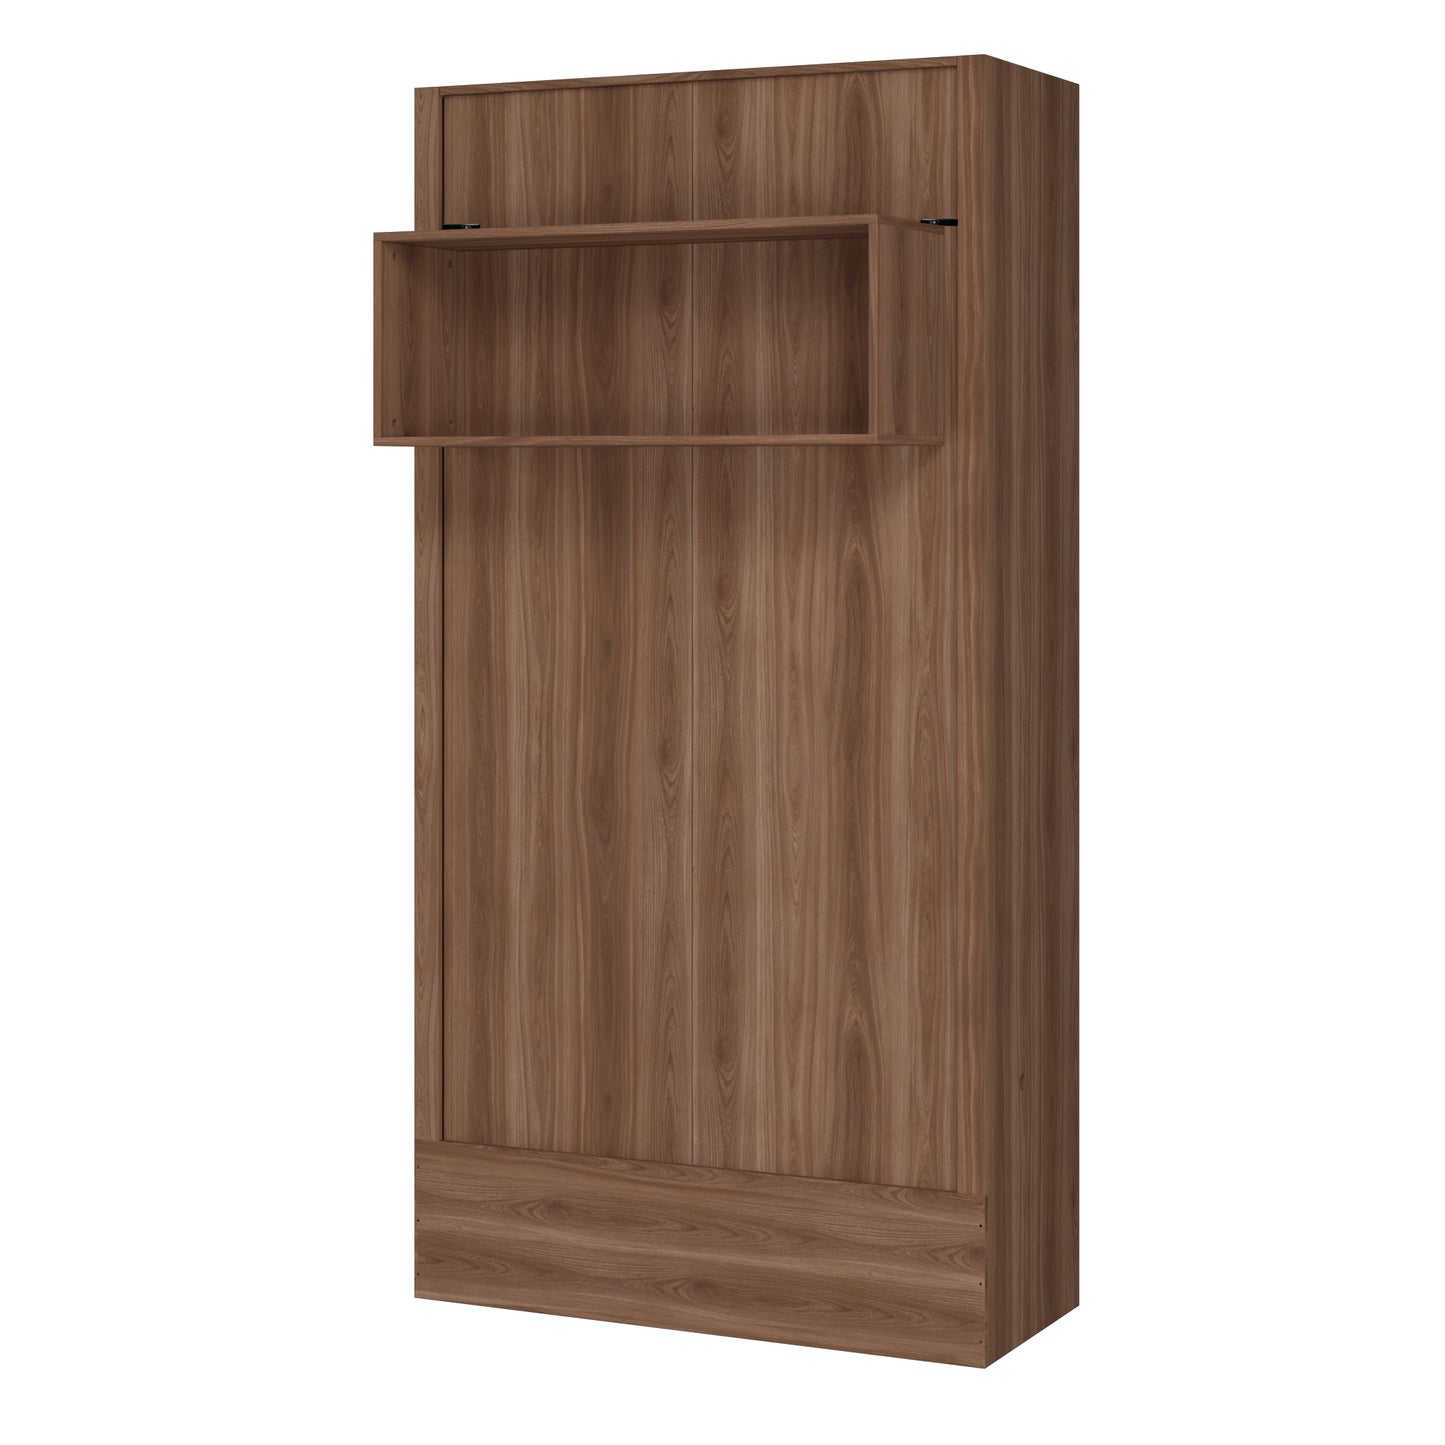 Easy-Lift Twin Murphy Wall Bed in Natural Brown Wood Grain with Shelf